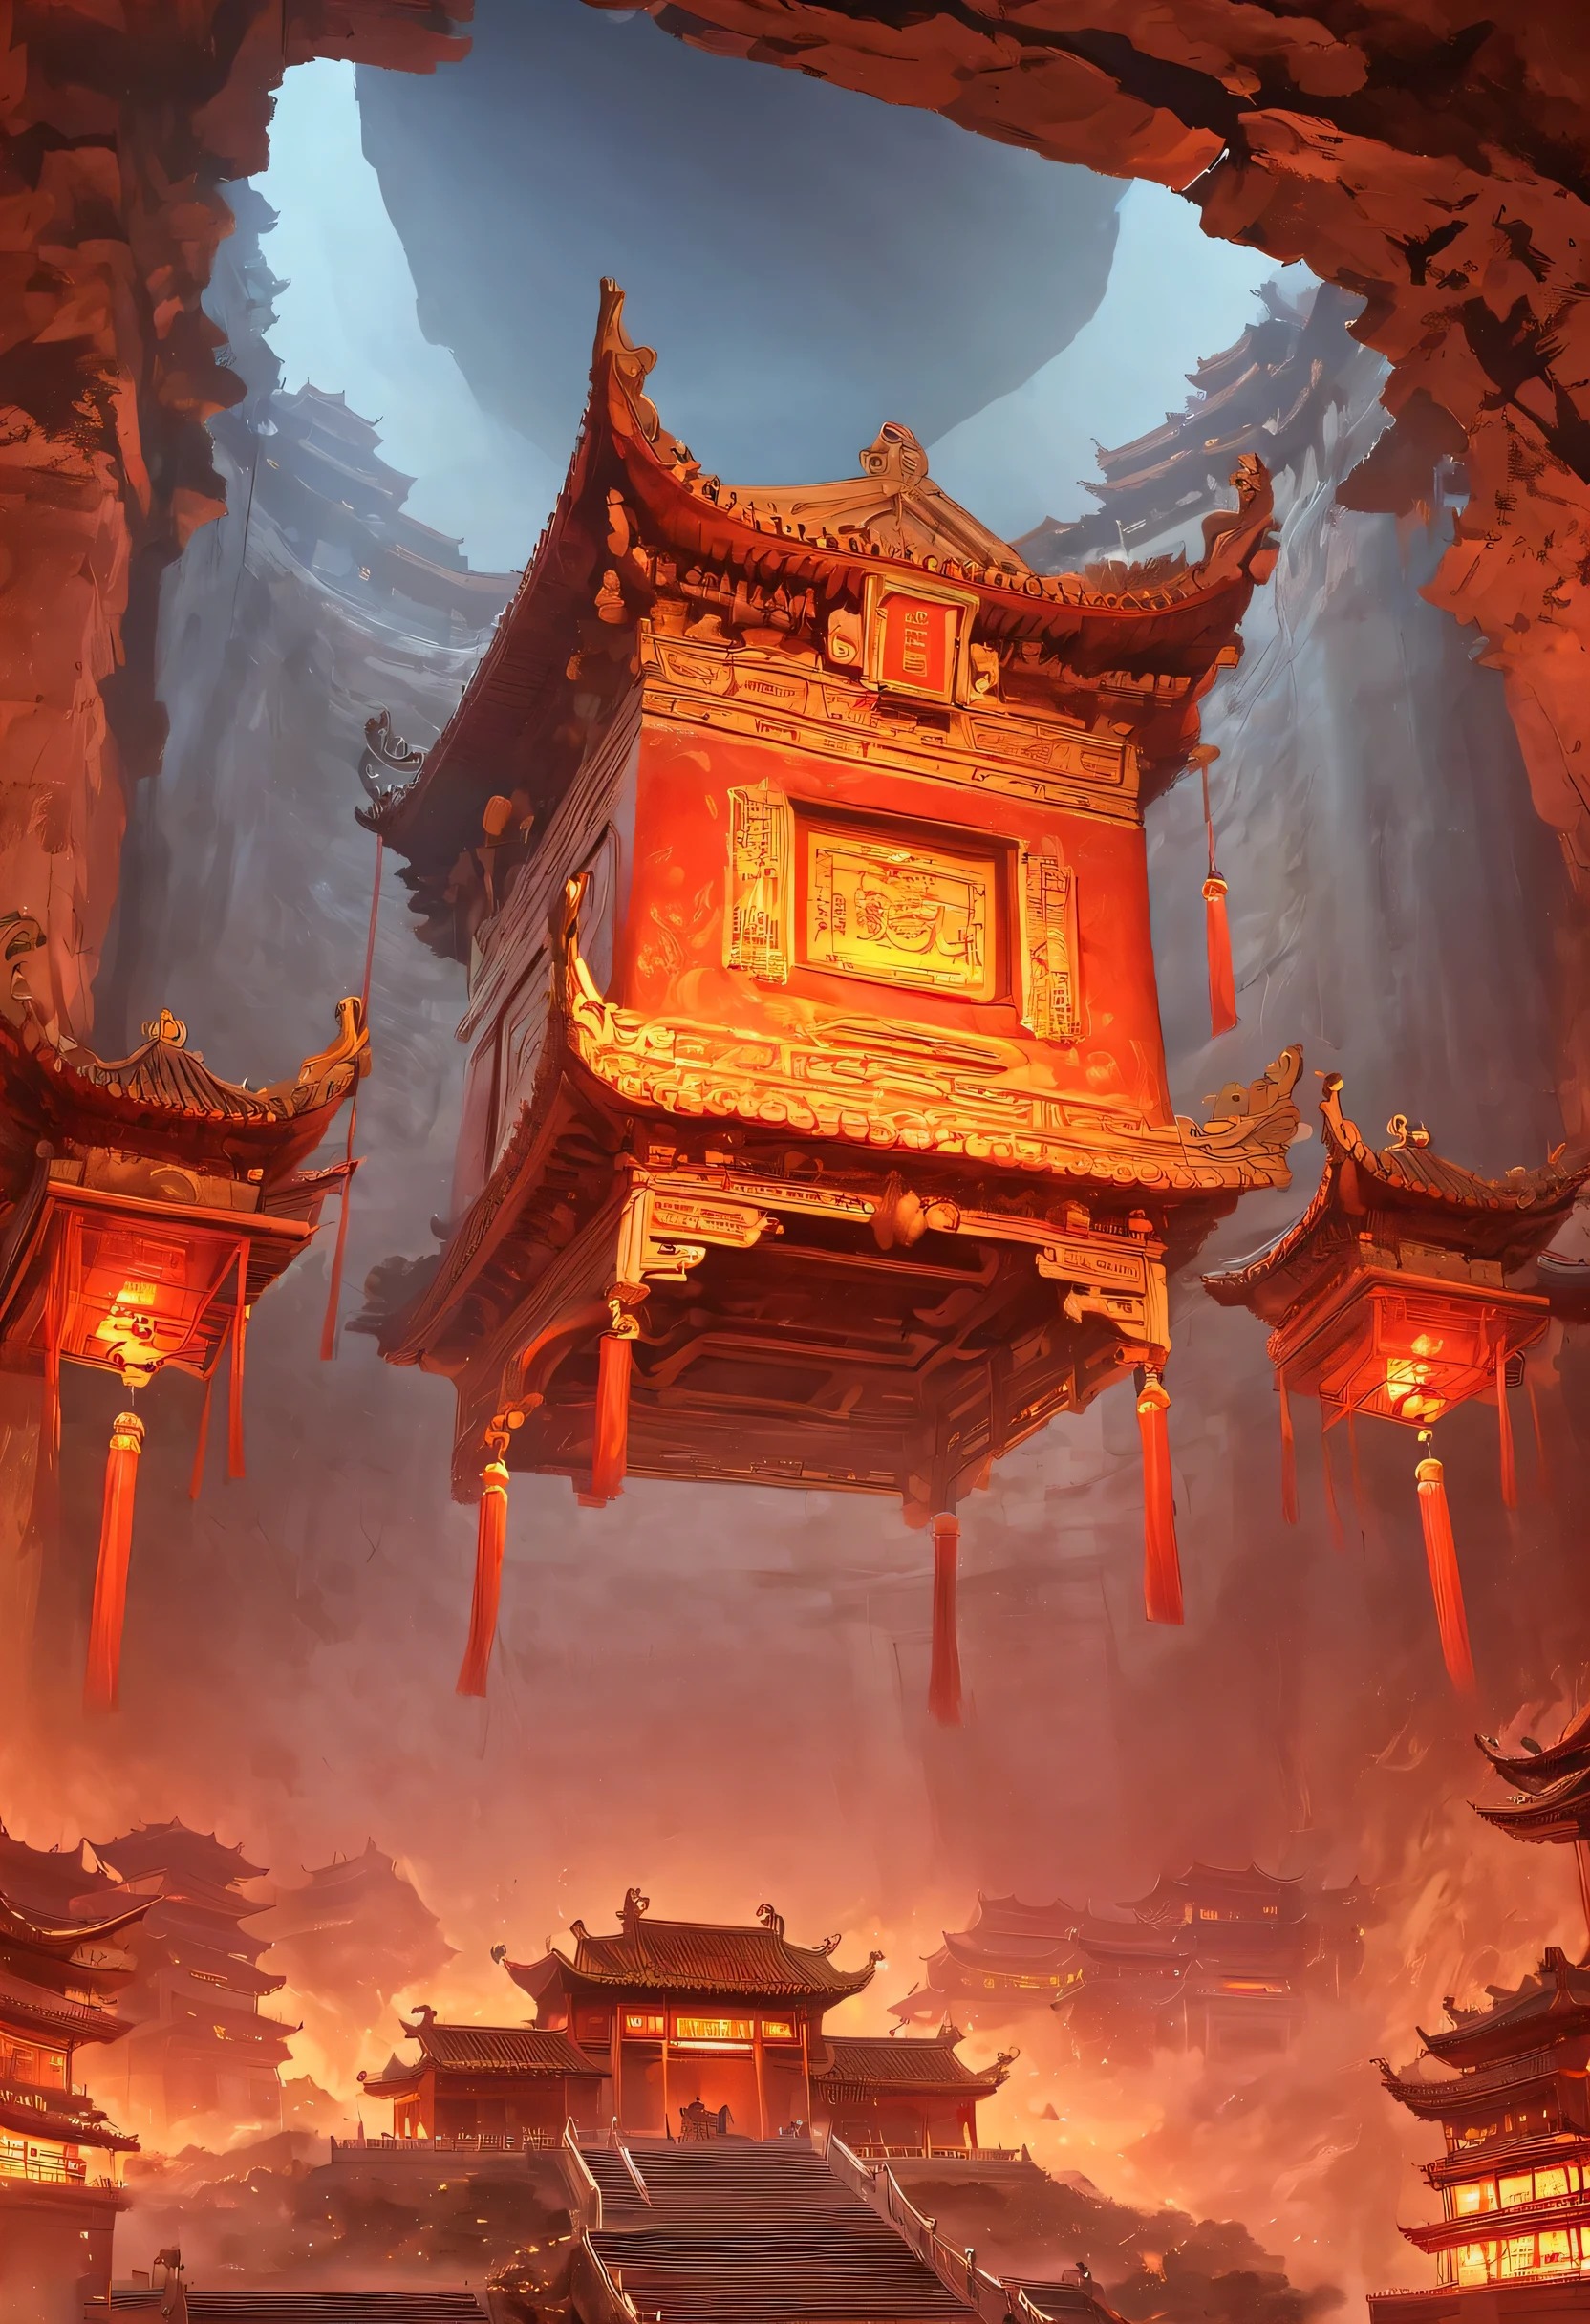 underground tomb：1.37.（（（Mysterious Oriental Underground Tomb，underground tomb，Magnificent and spacious majestic landscape））），Red sedan suspended in the air，Chinese sedan，dim lights，intricately carved stone walls，The mysterious atmosphere is scary，Supernatural powers。
